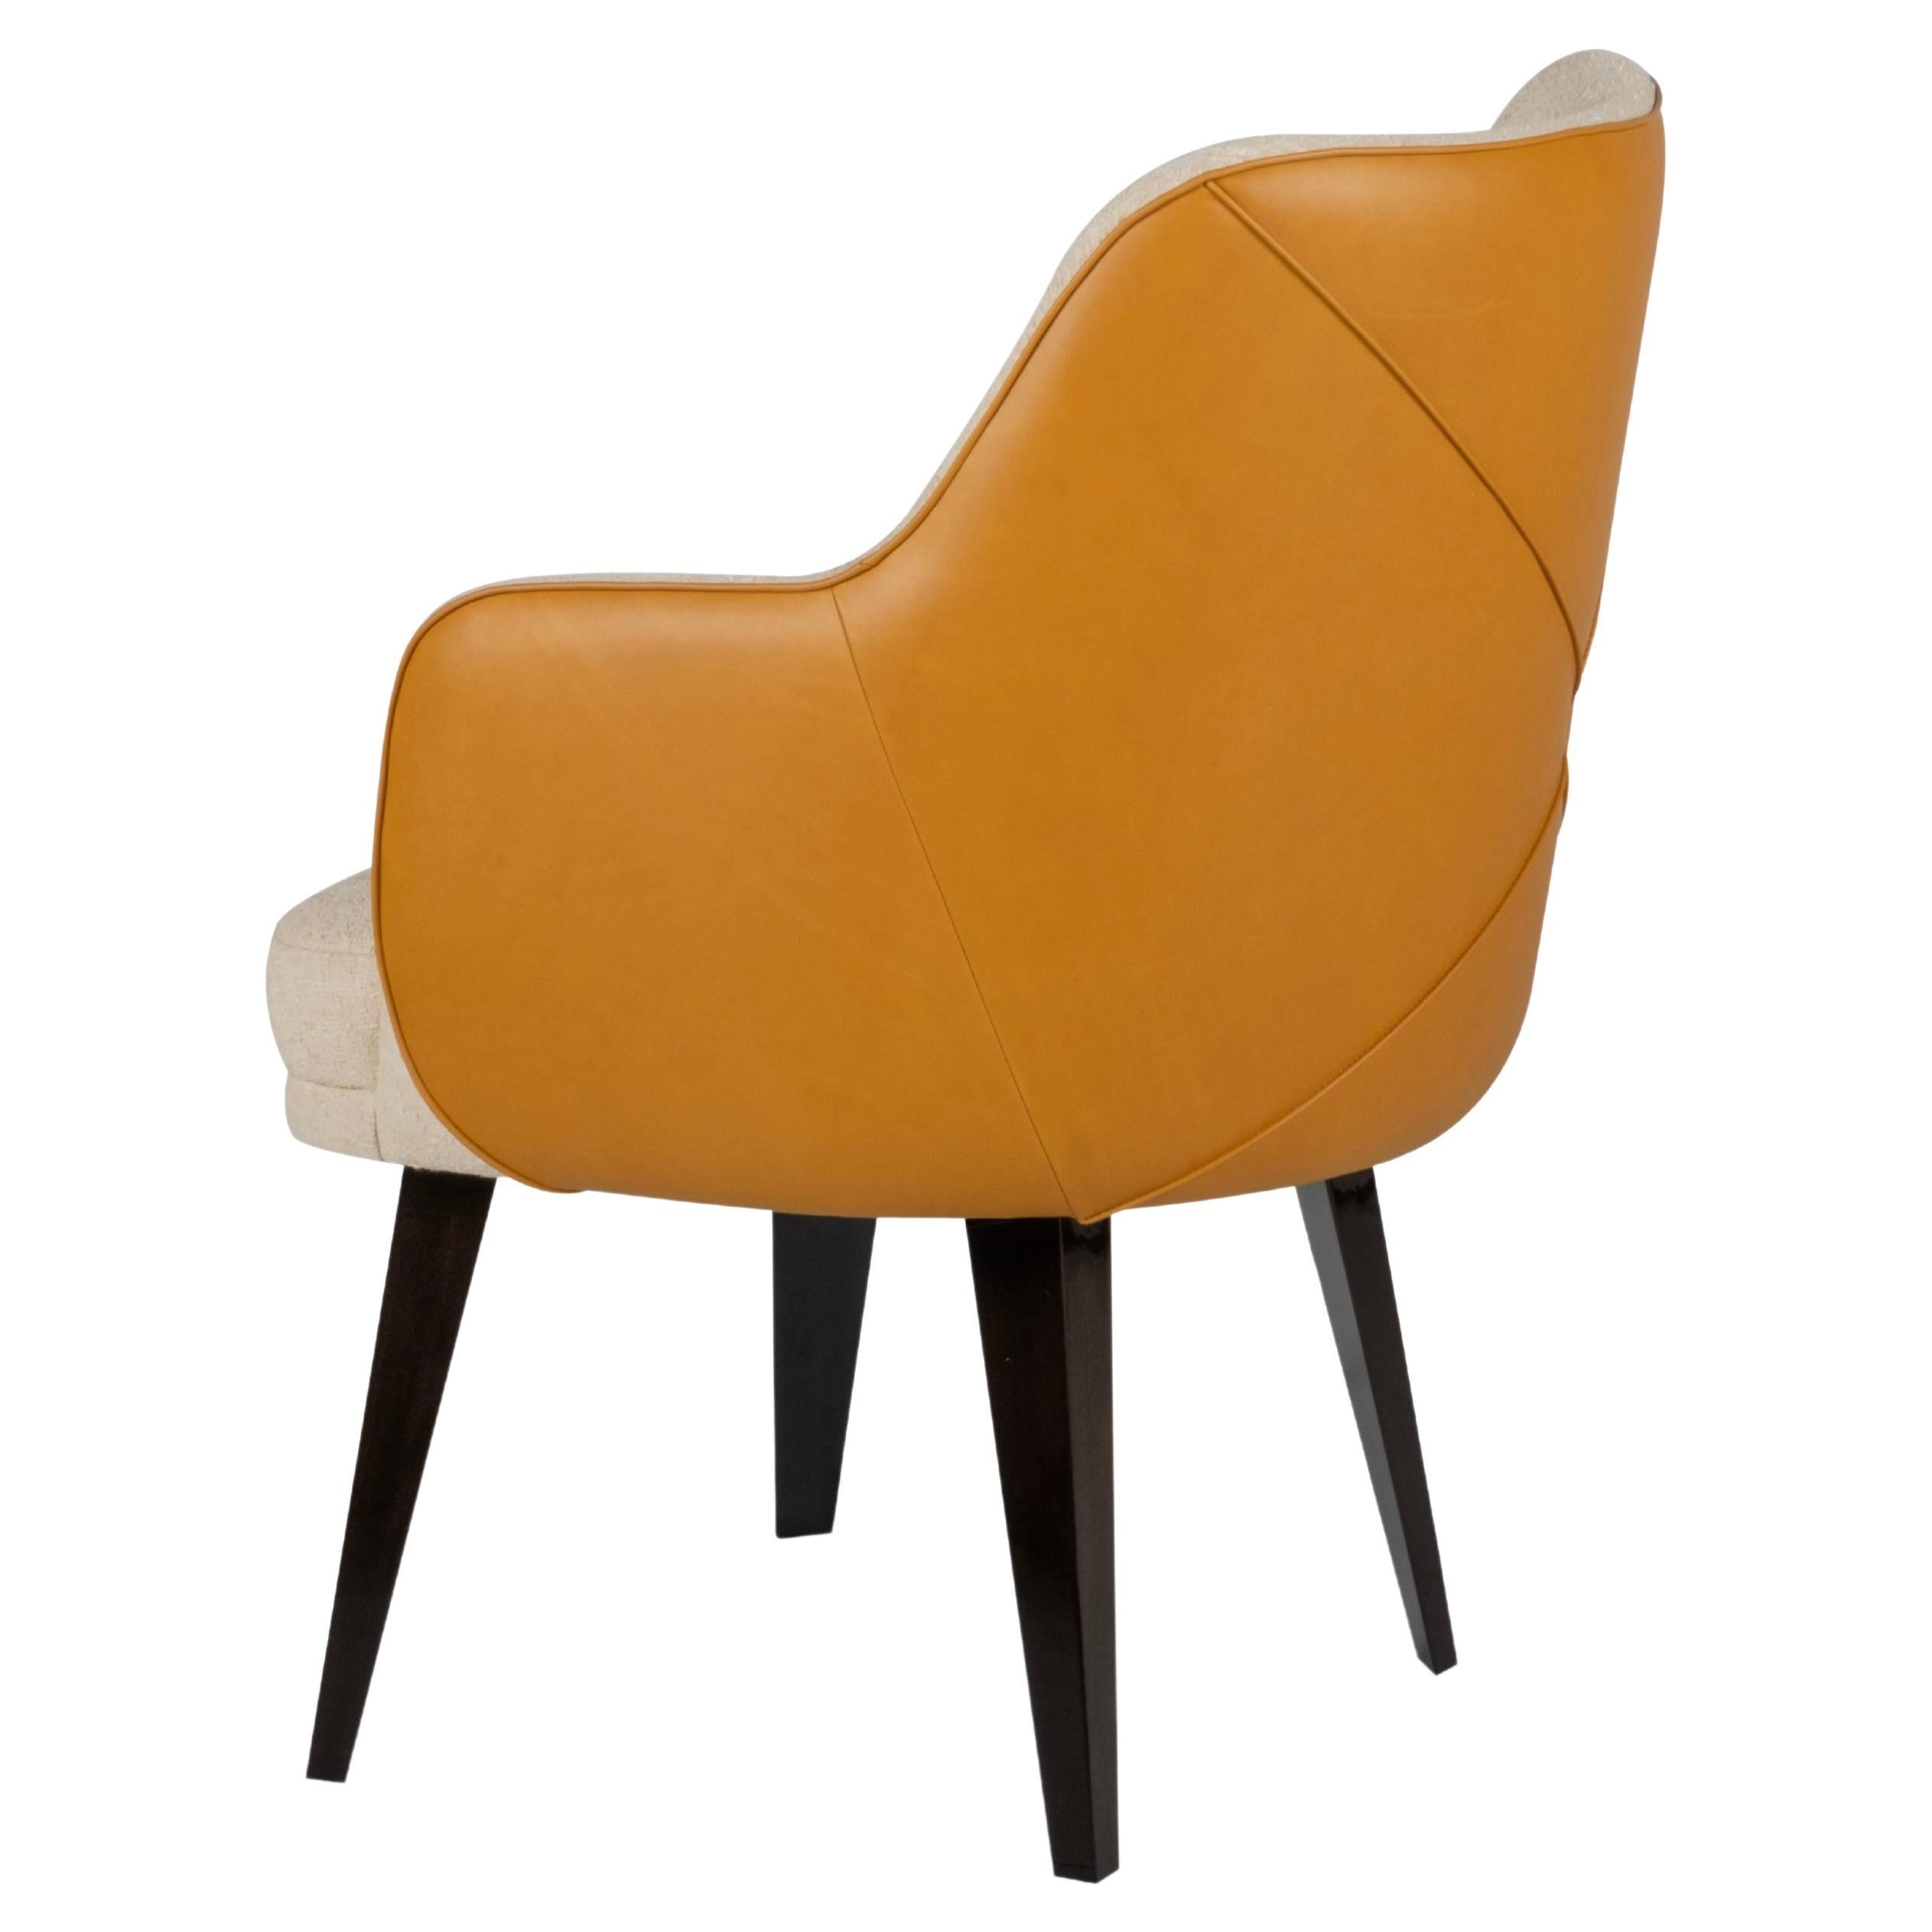 Modern Margot Dining Chairs, Camel Leather, Handmade in Portugal by Greenapple